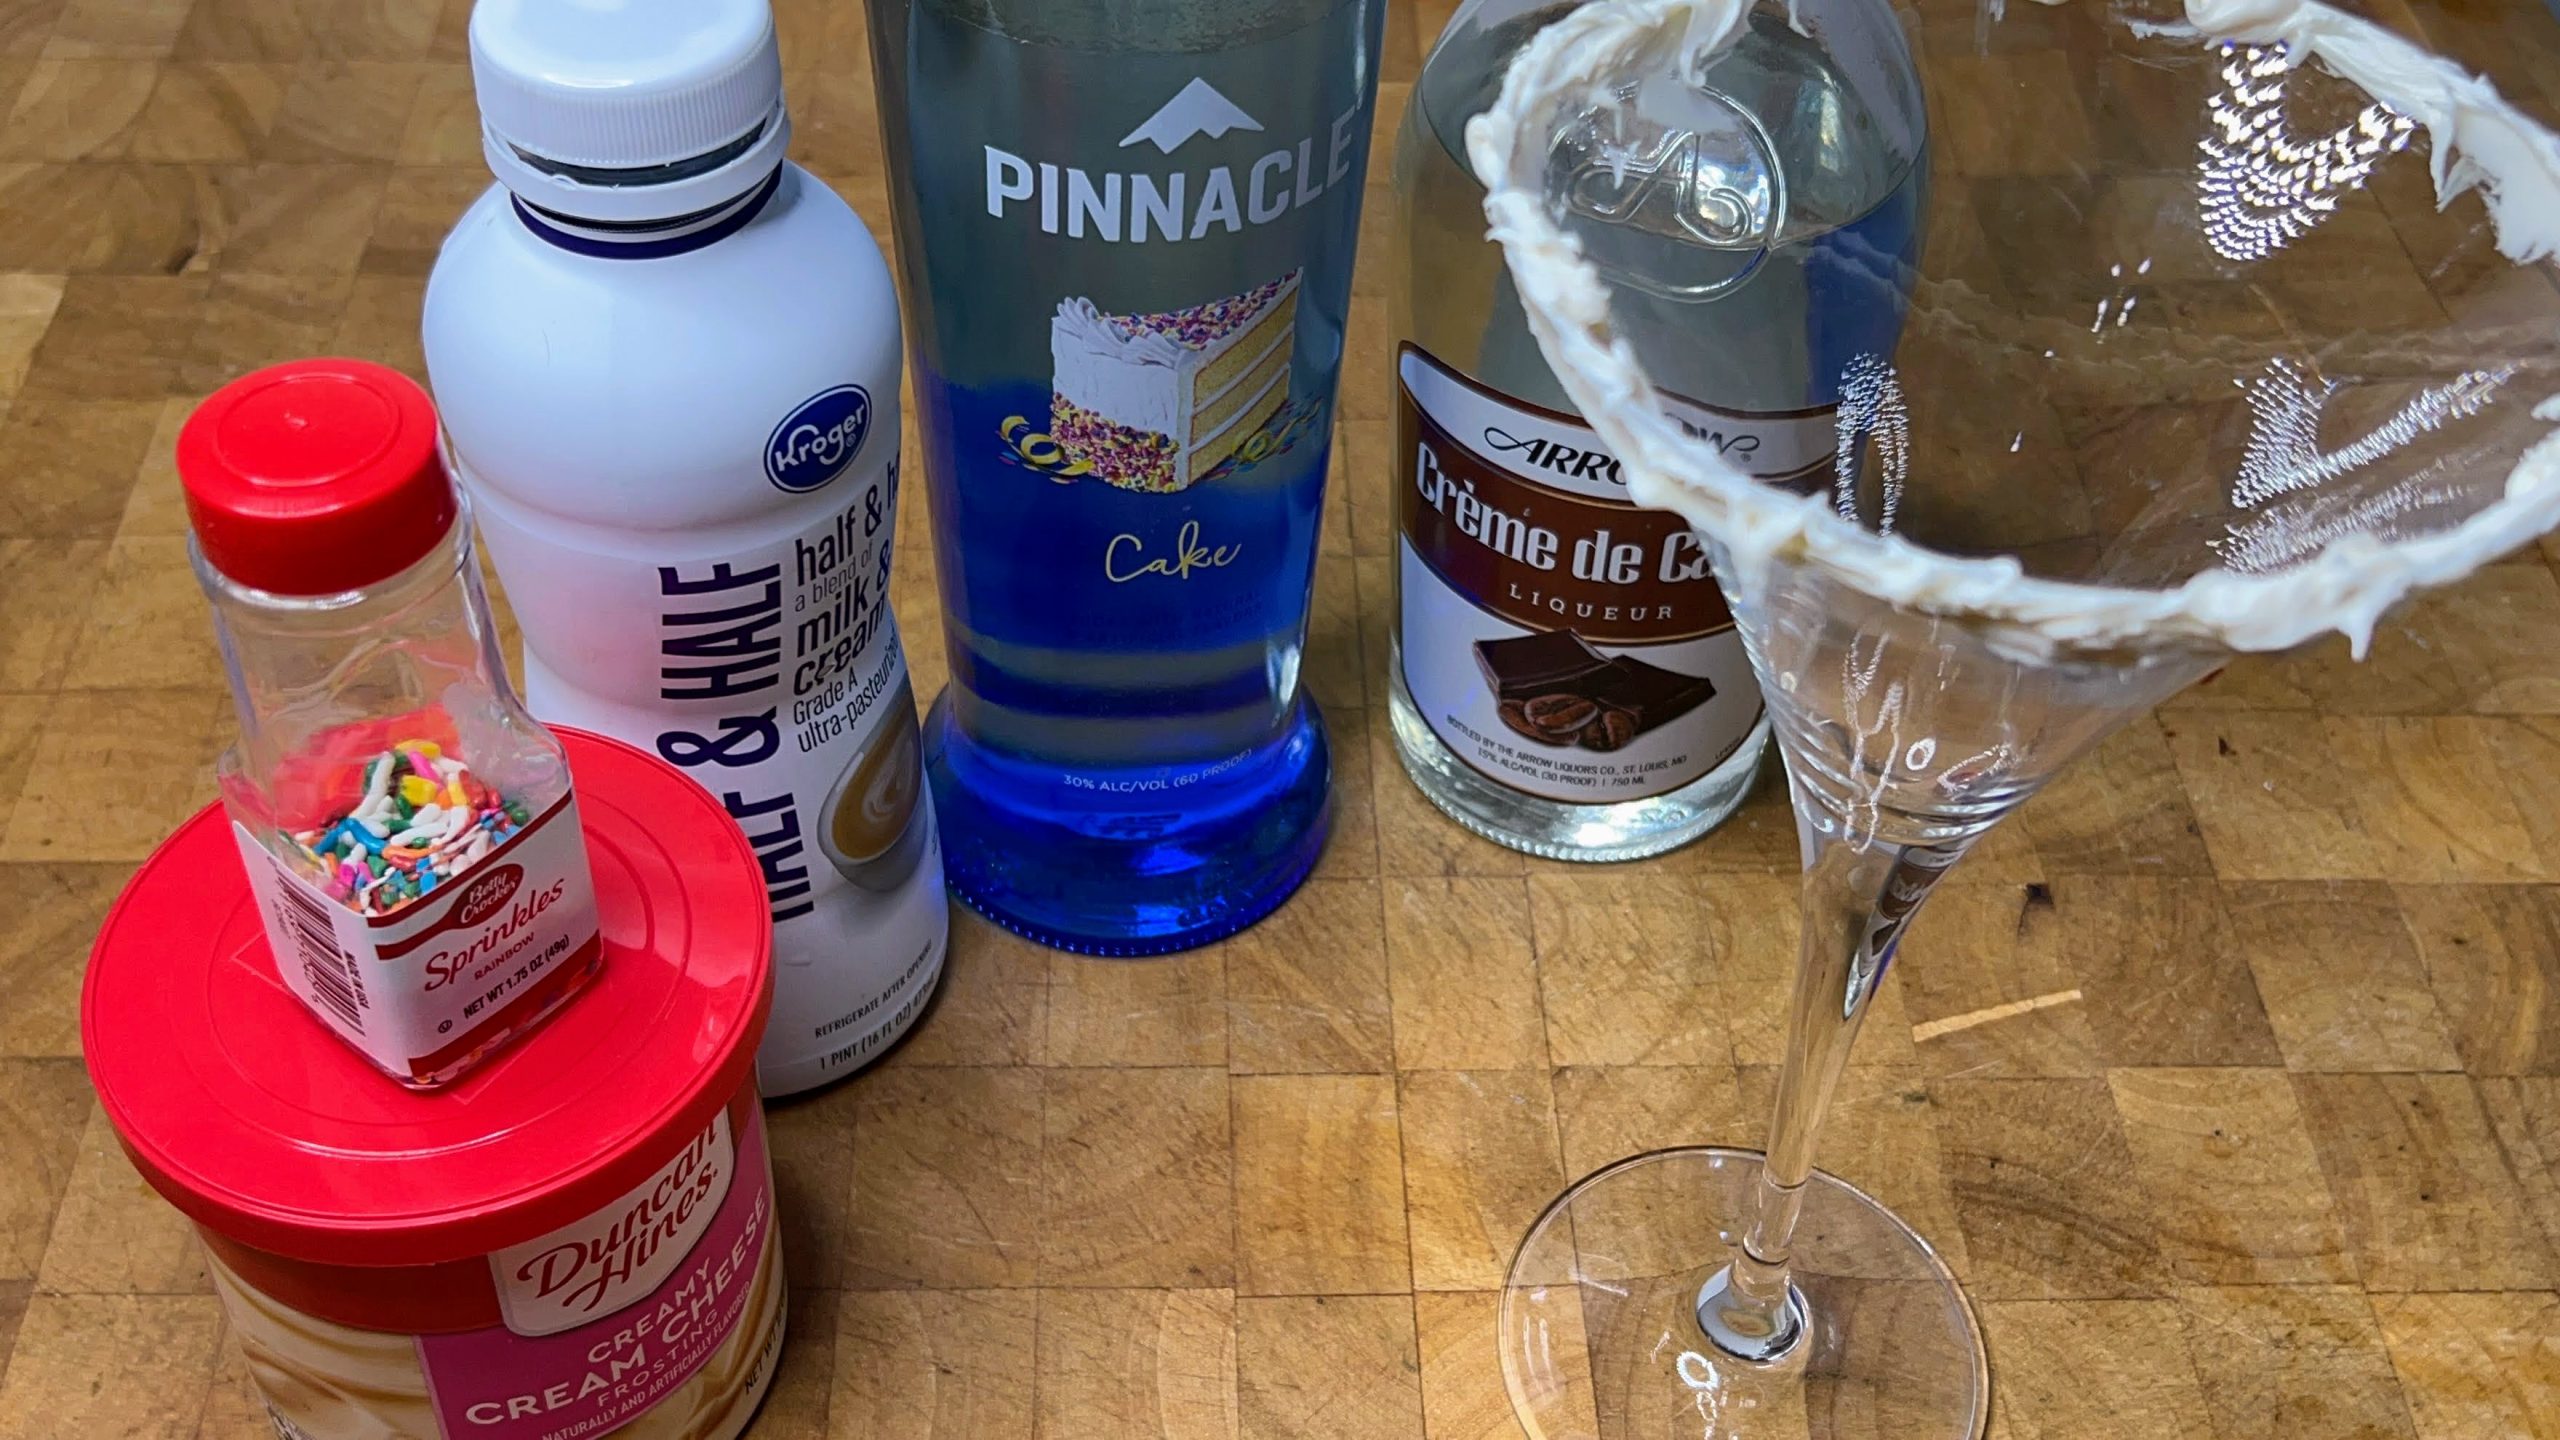 martini glass with frosting on the rim next to bottles of frosting, sprinkles, half and half, cake vodka and white cream de cacao